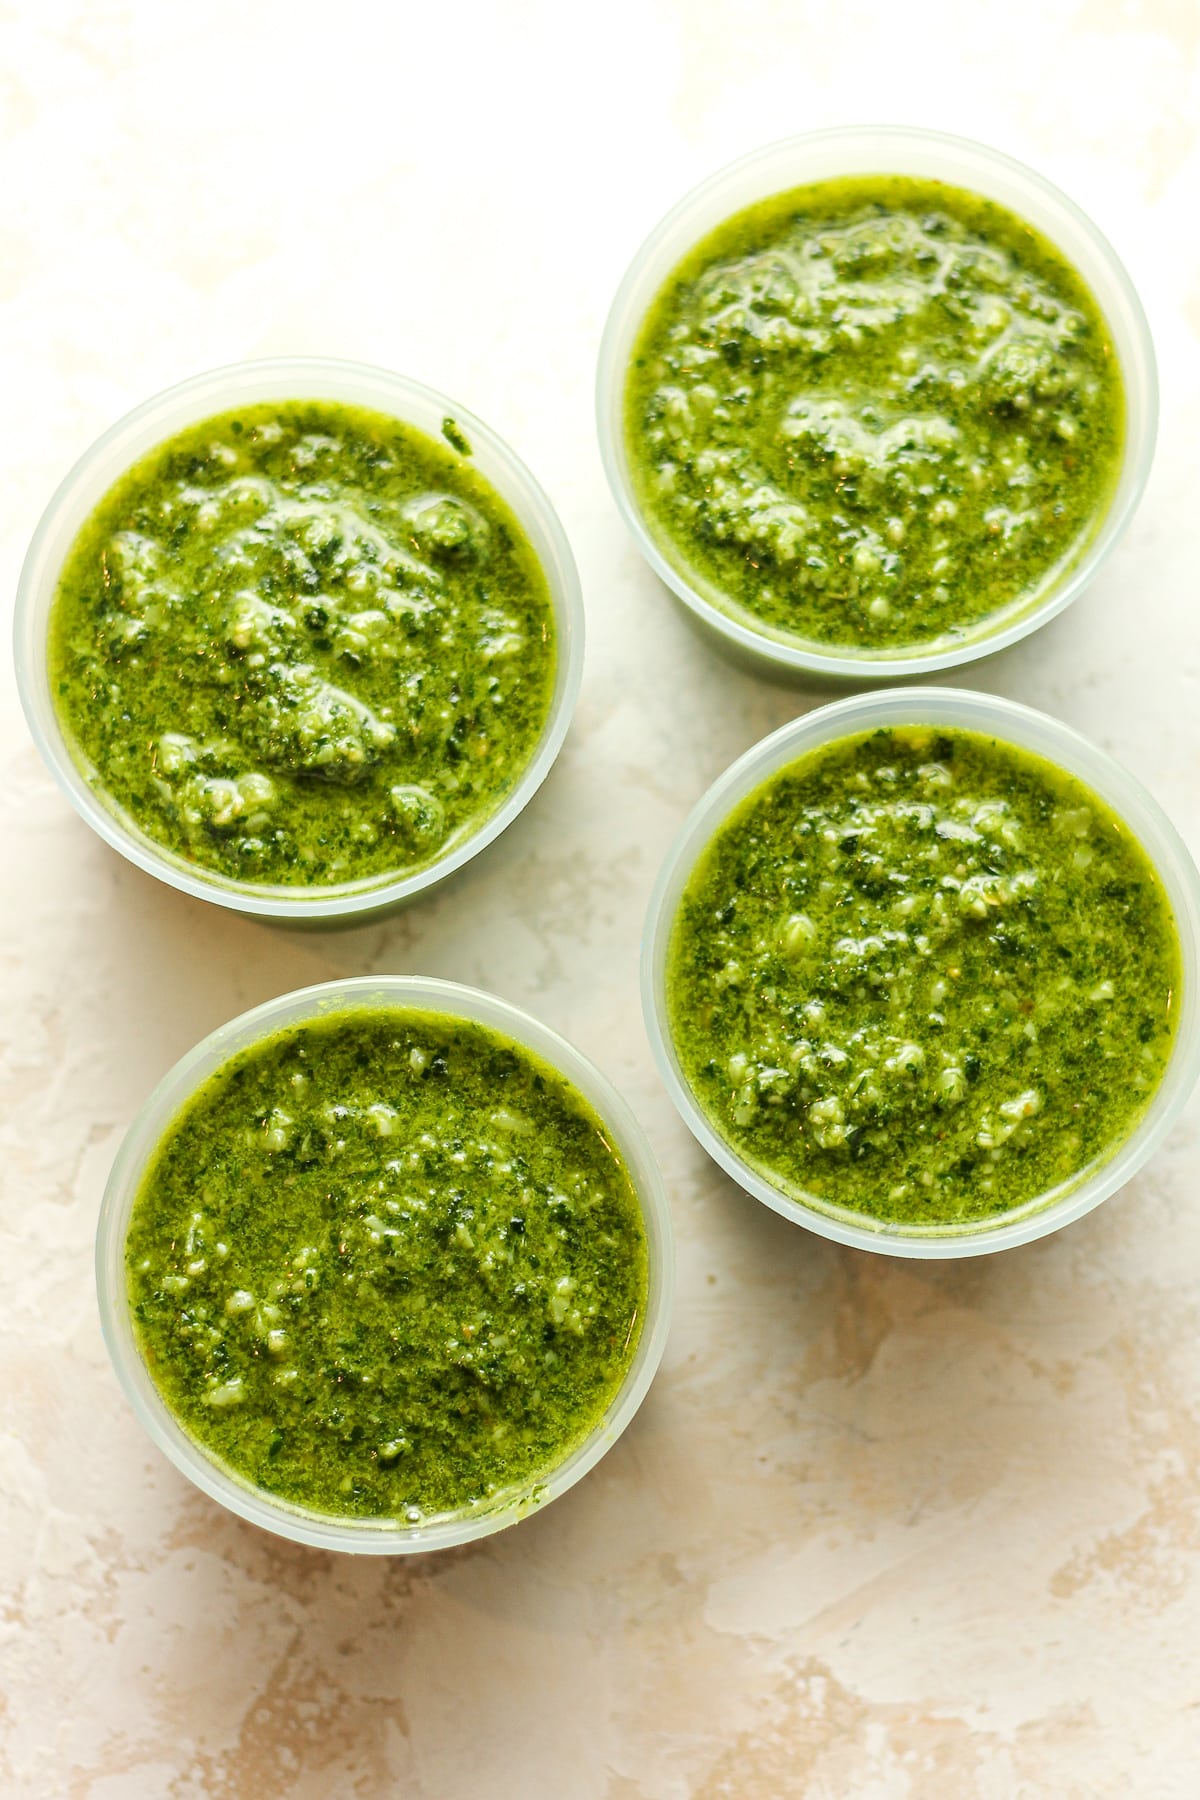 Overhead view of four small containers of pesto with spinach.